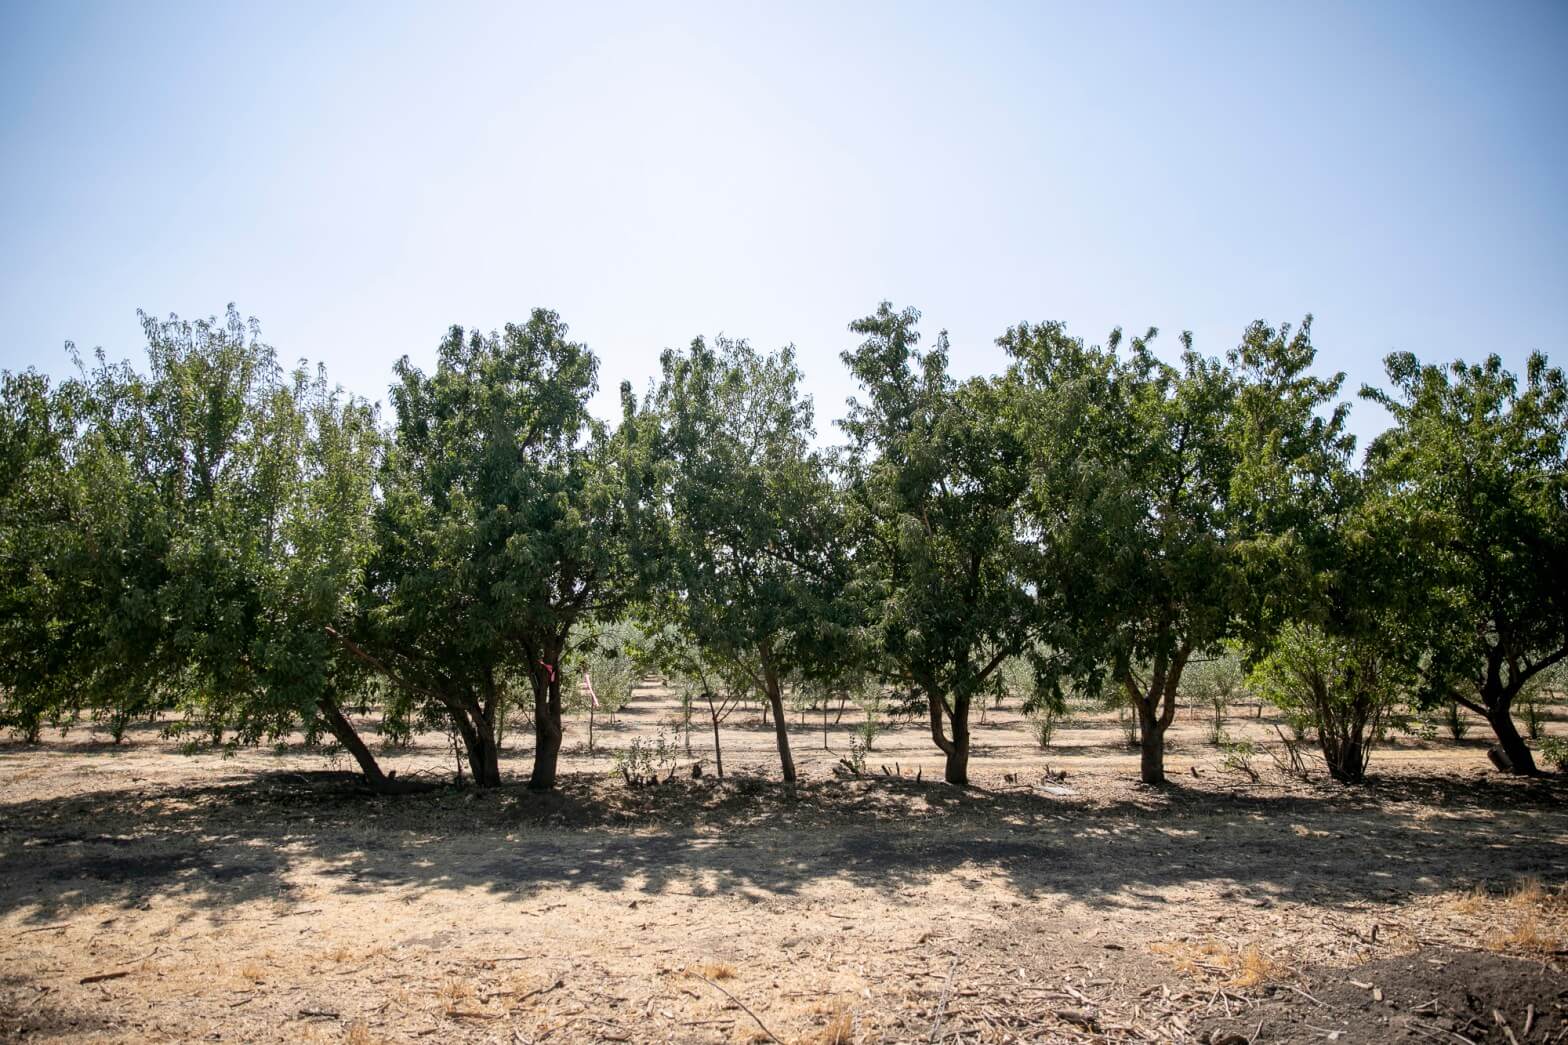 This grove of almond trees has been grown without any supplemental water at Wolfskill Experimental Orchards near Davis. August 2021